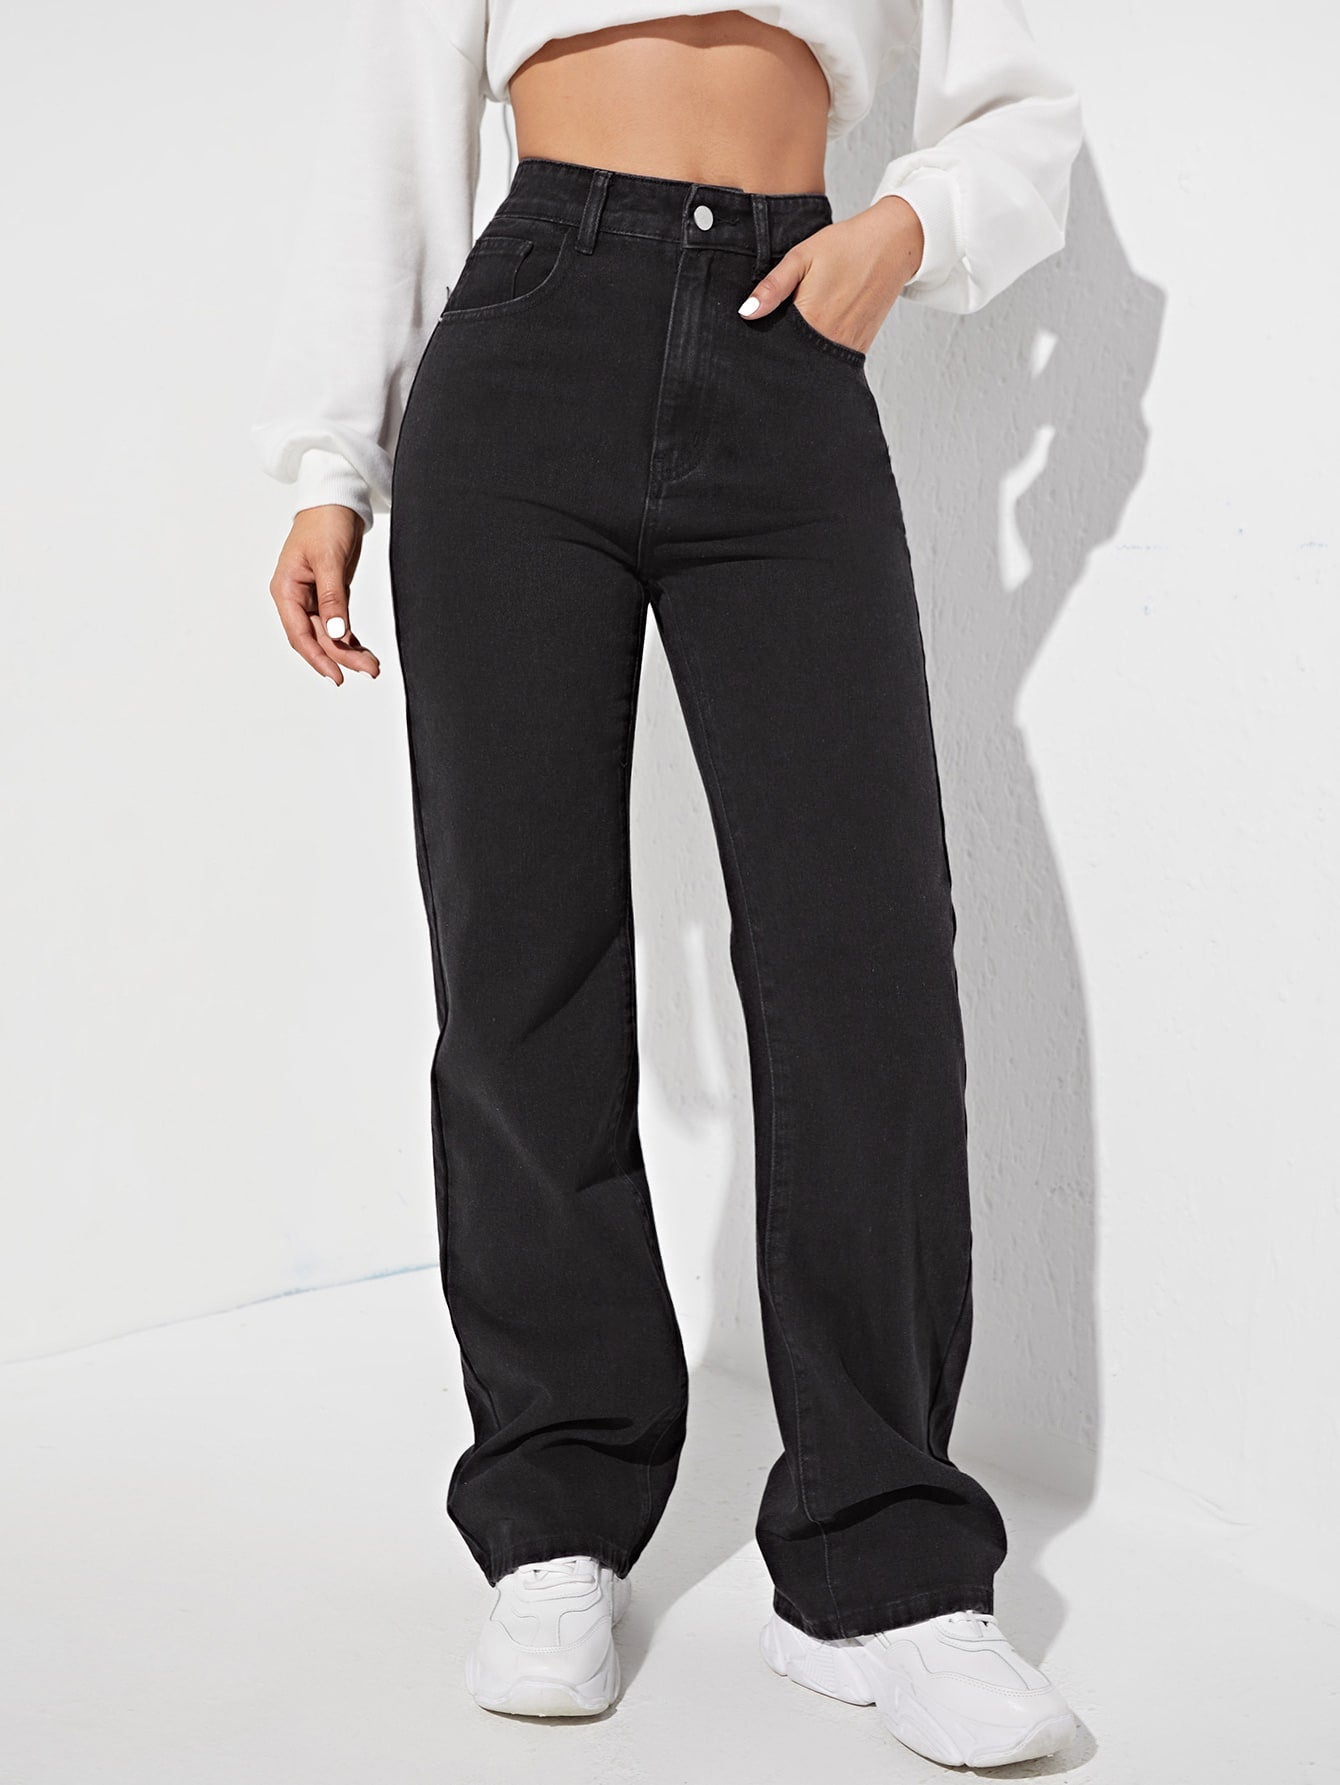 Buy TINA HIGH-RISE BLUE WIDE LEG JEANS for Women Online in India